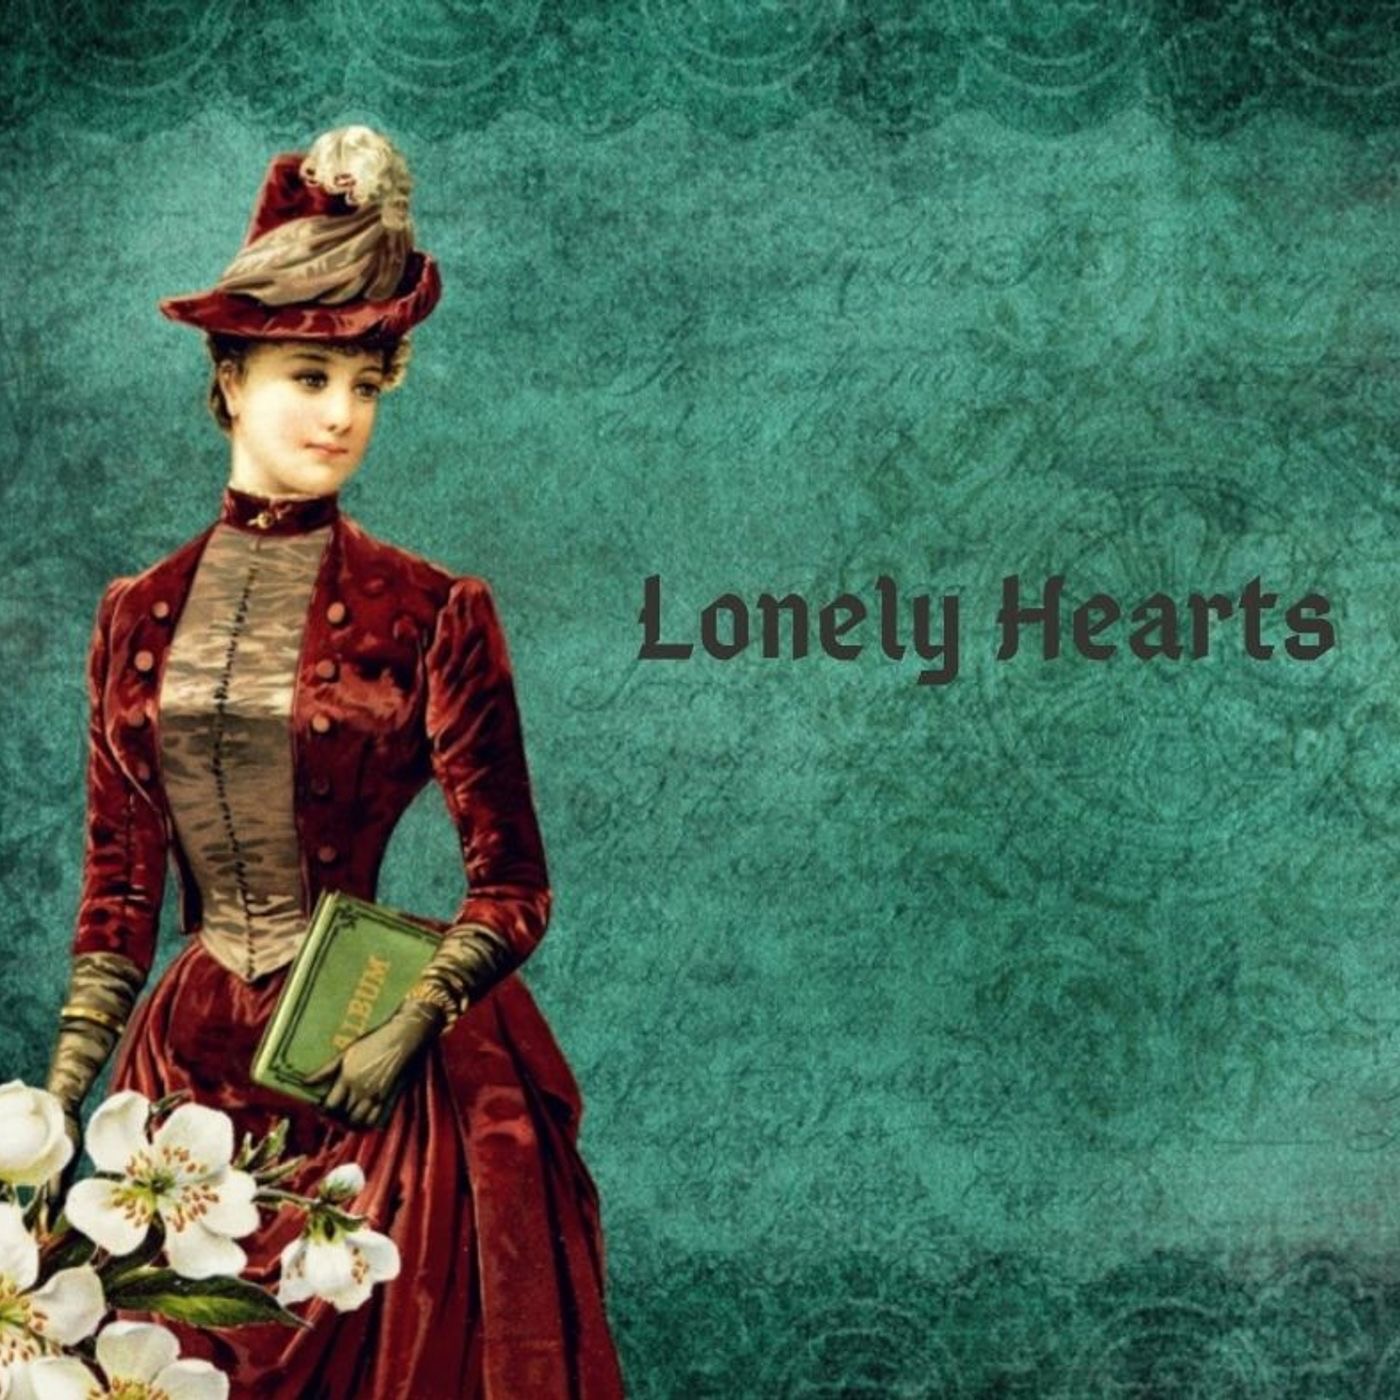 S5 Ep1: Lonely Hearts